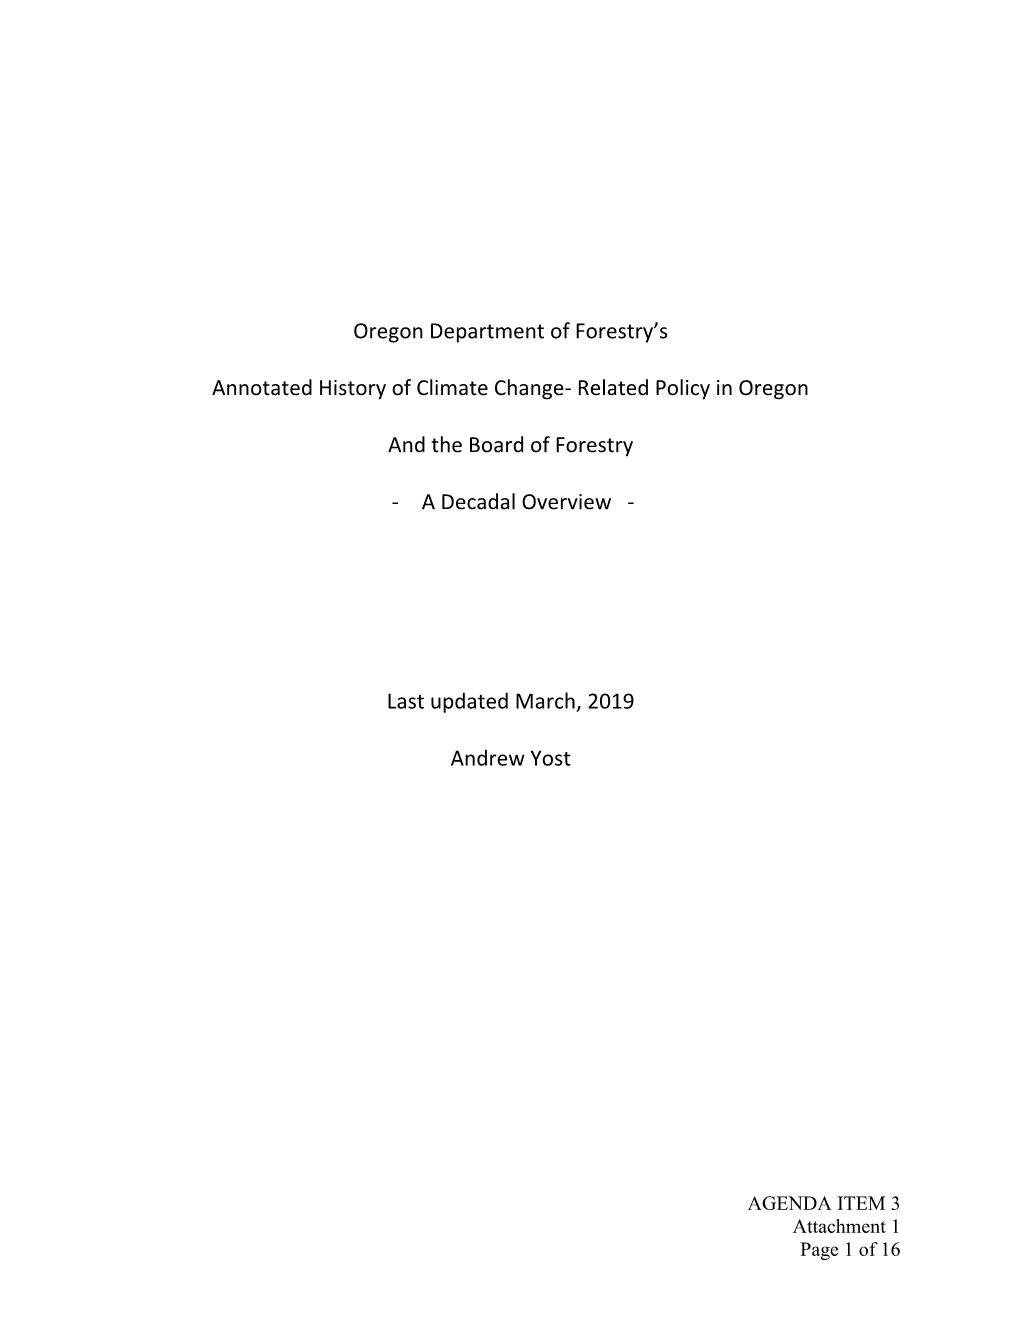 Oregon Department of Forestry's Annotated History of Climate Change